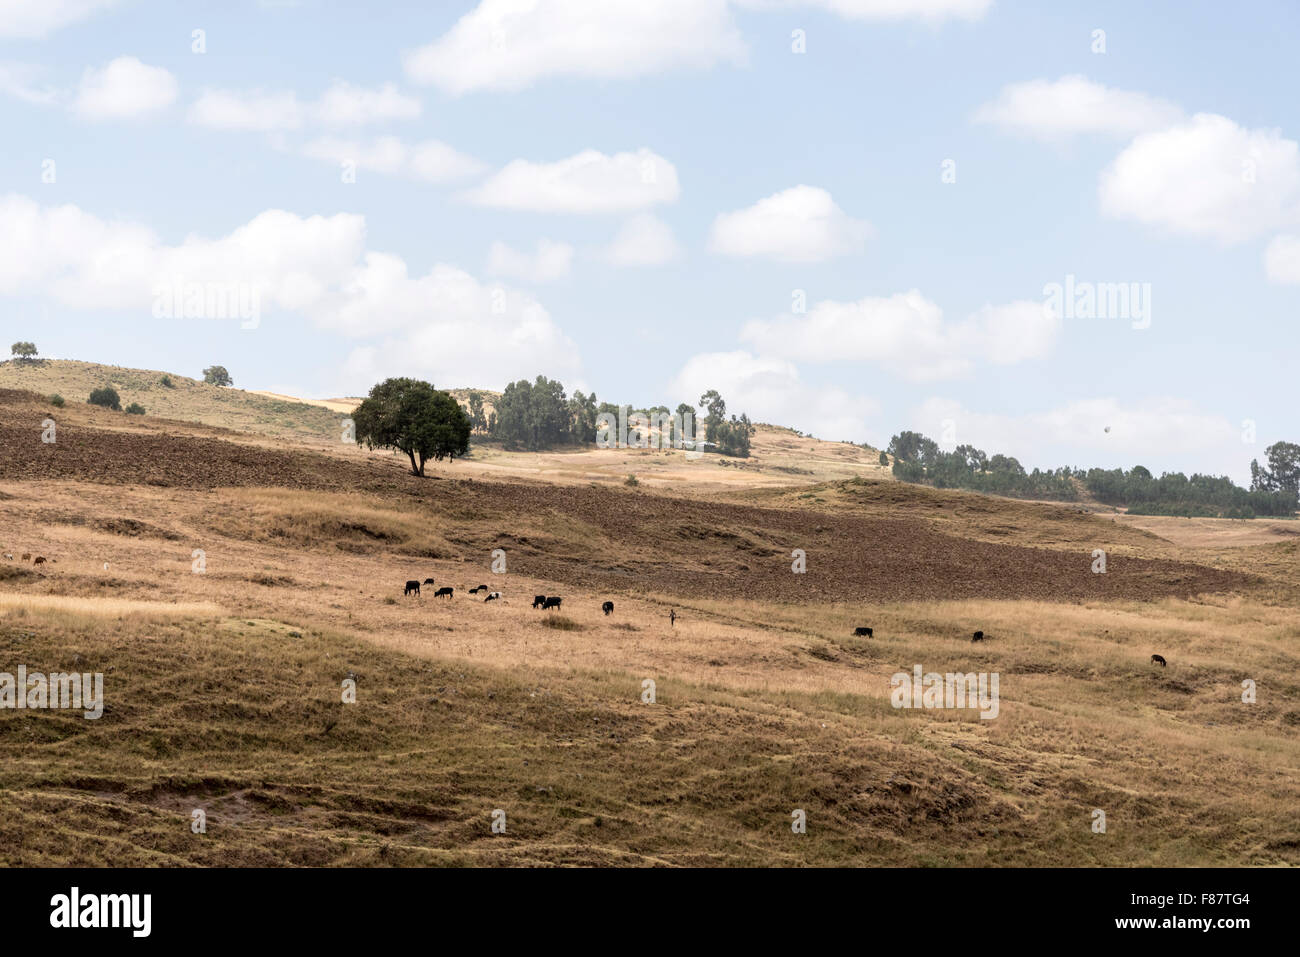 A small herd of cows being driven across some dry fields in the Jemma Valley, Ethiopia Stock Photo